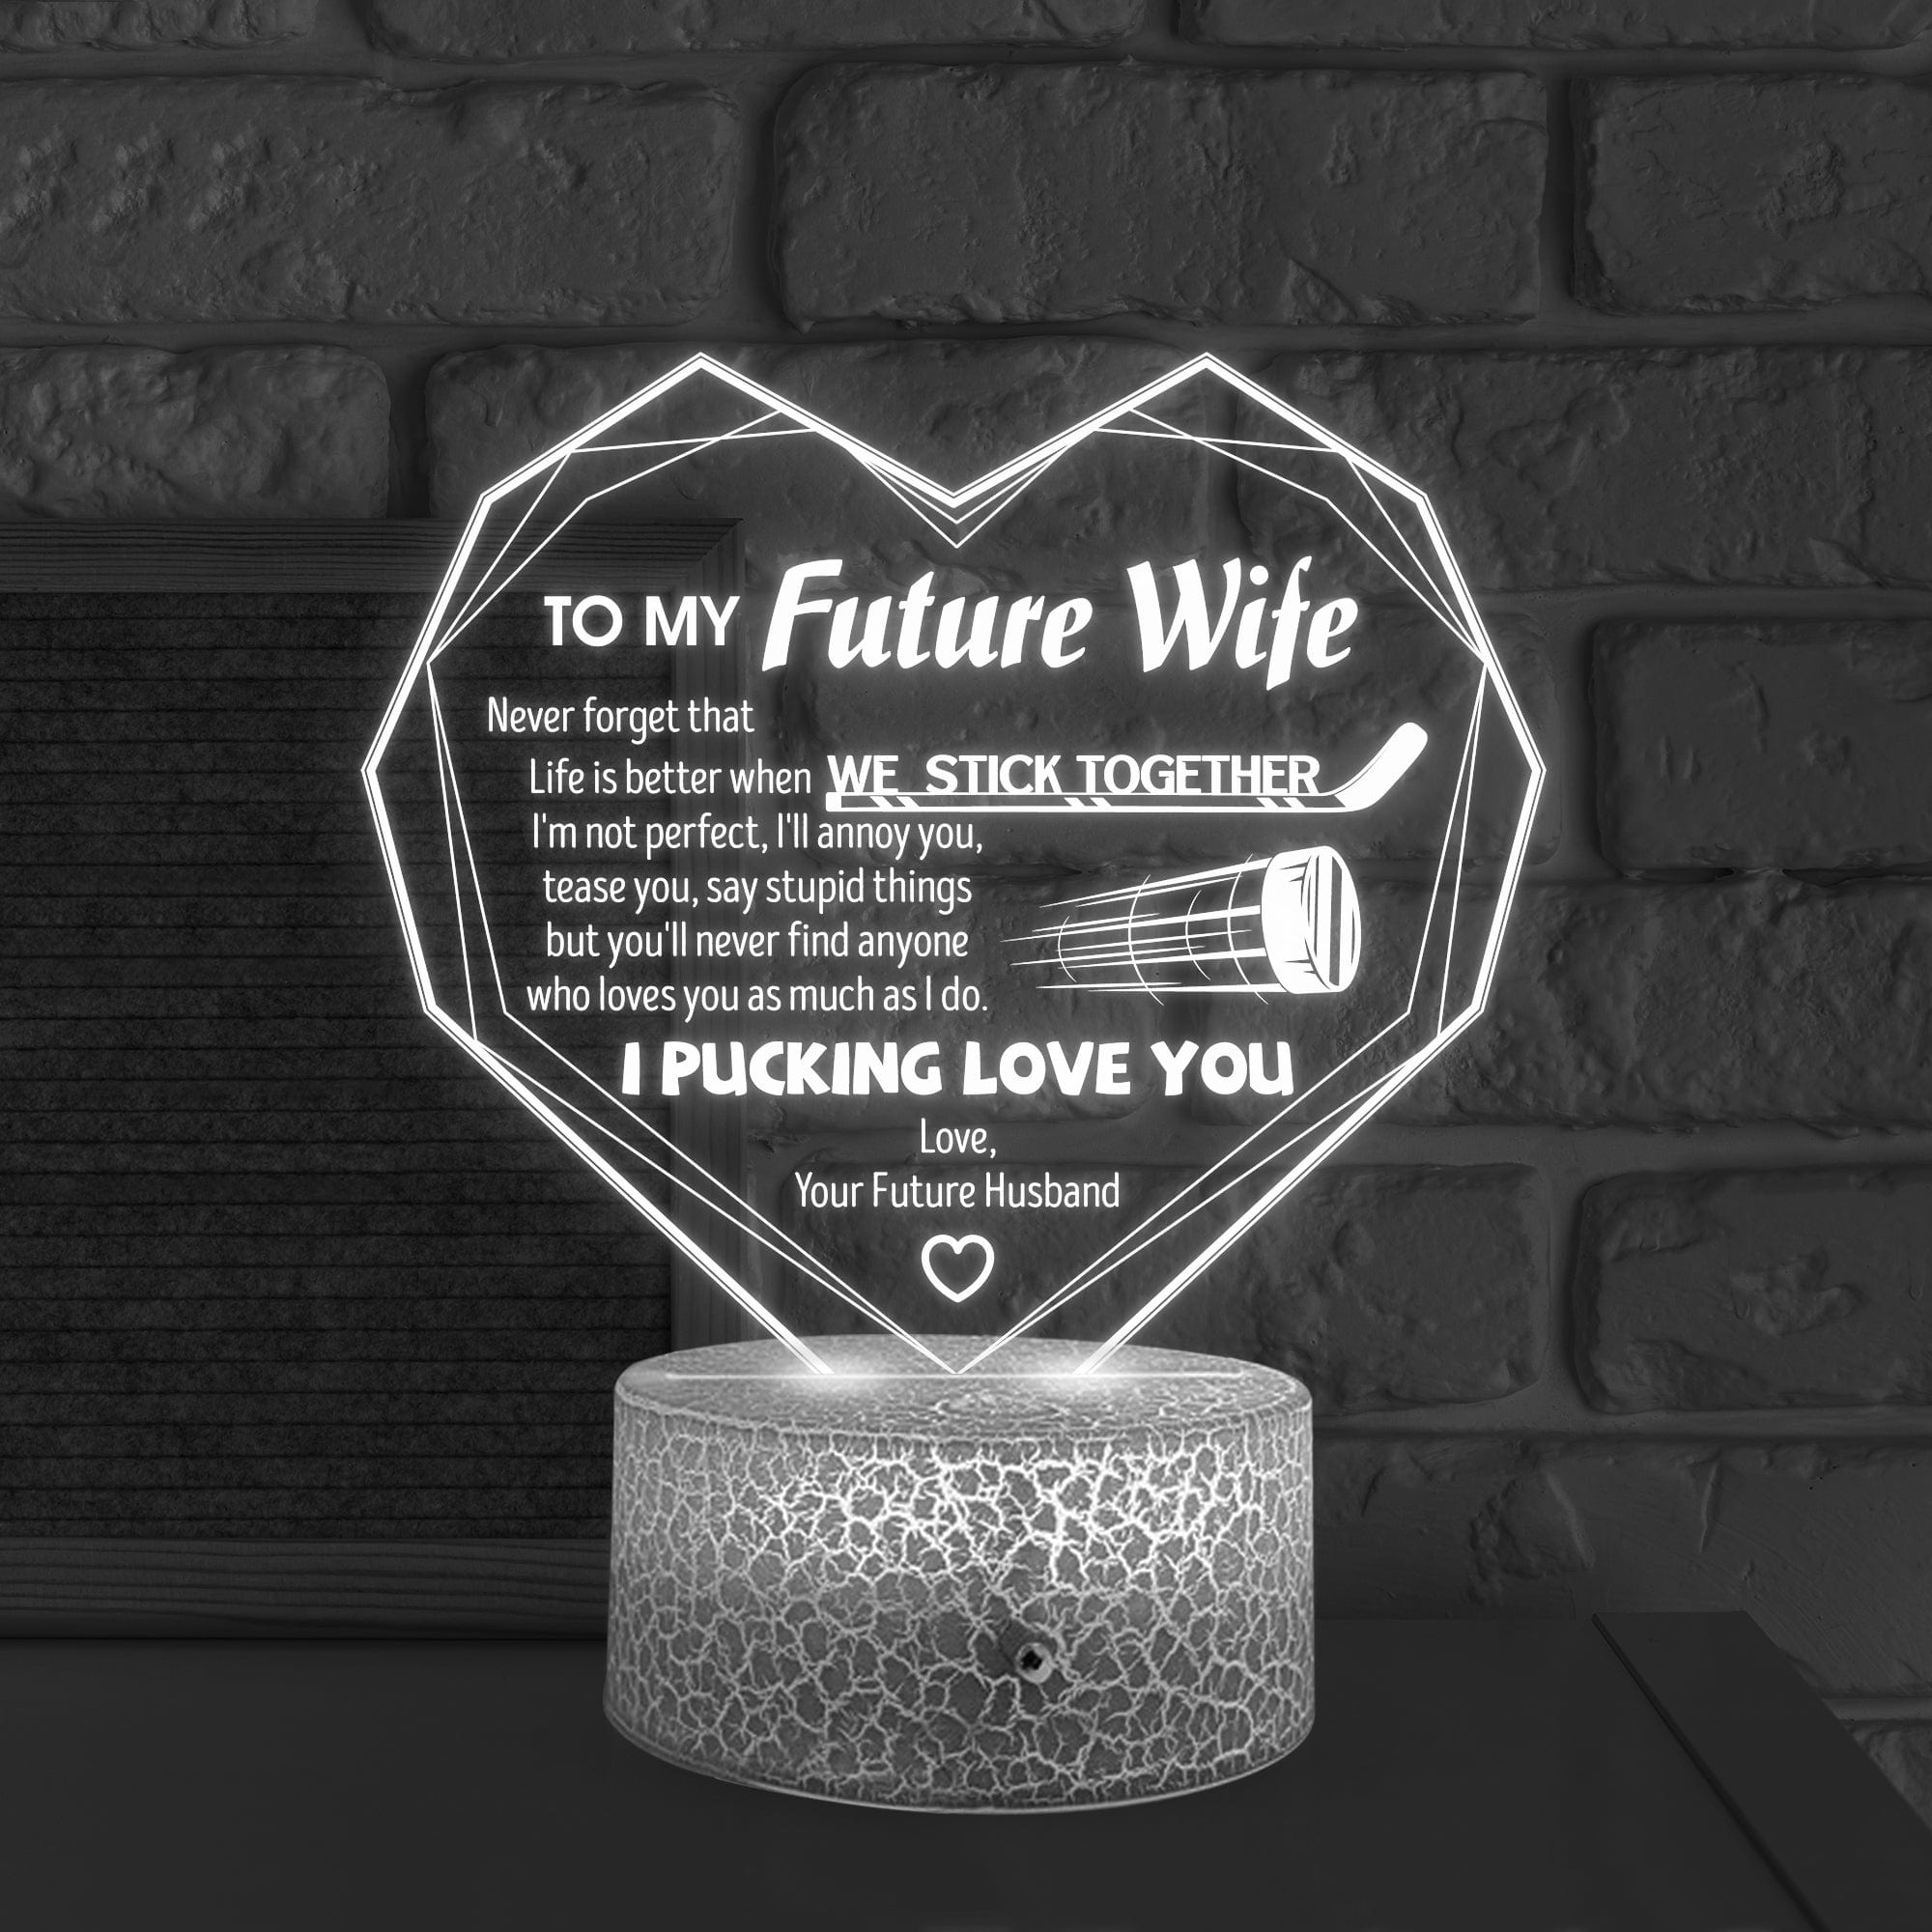 3D Led Light - Hockey - To My Future Wife - Life is Better - Glca25010